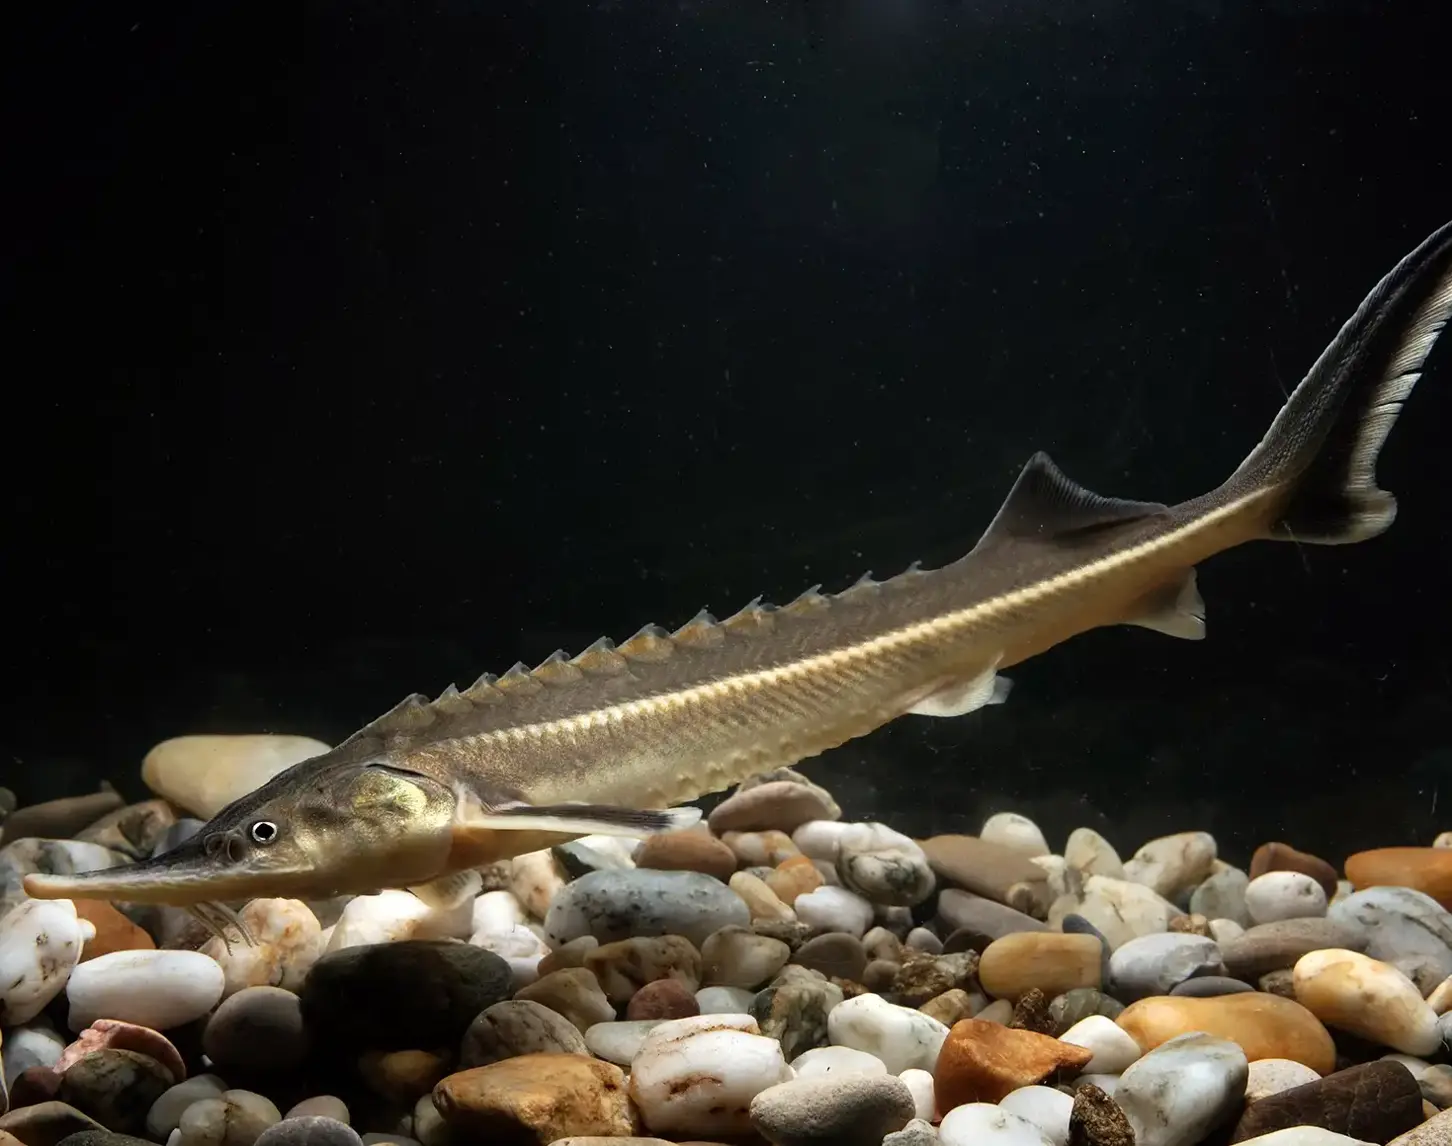 The sterlet belongs to the group of Danube sturgeons and grows to around one meter in size when fully grown.